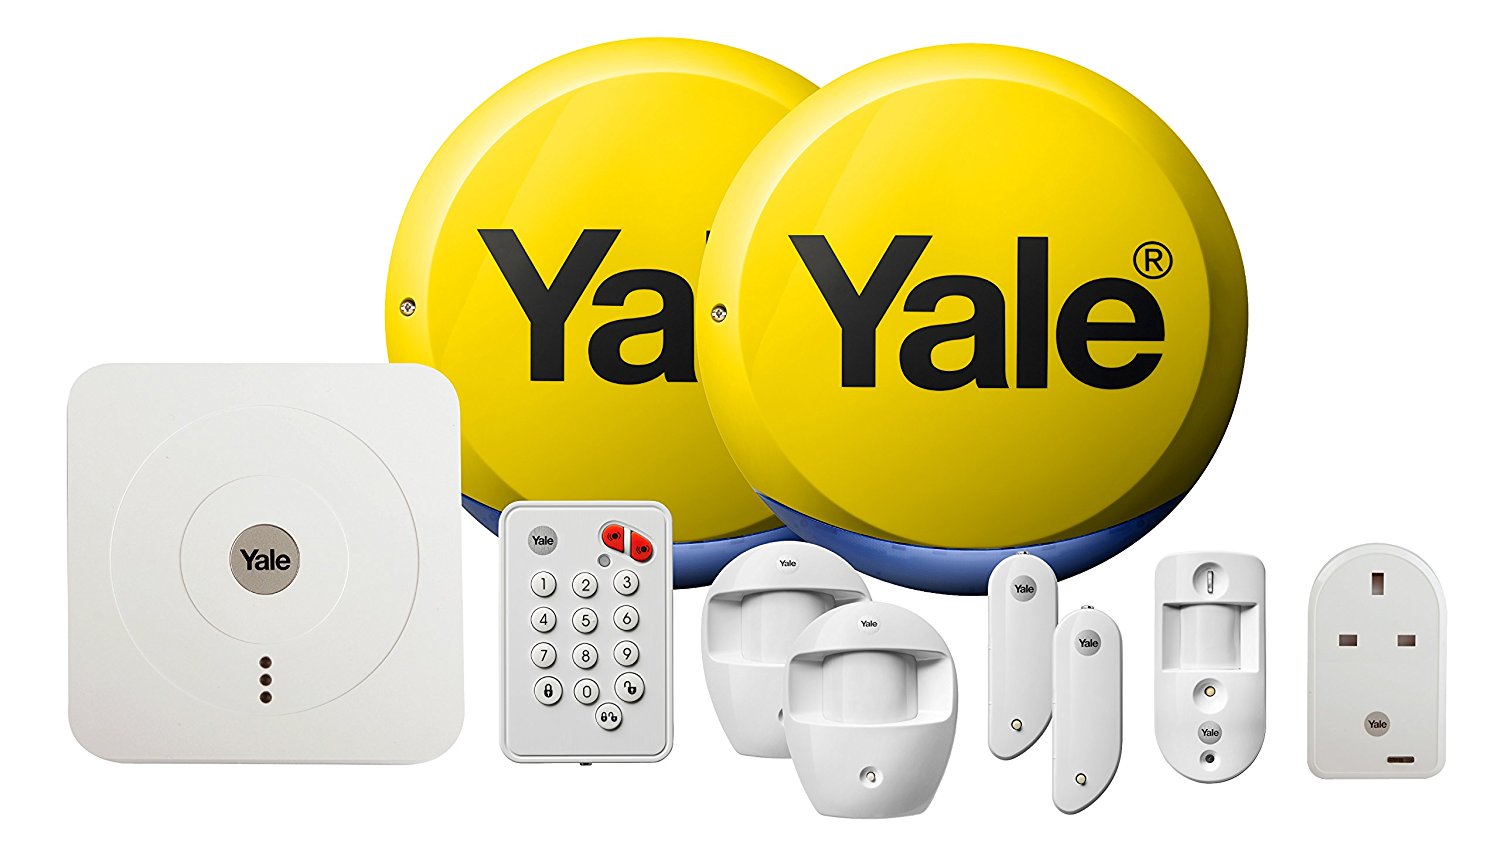 Advantages of the Yale Smart Home Alarm 